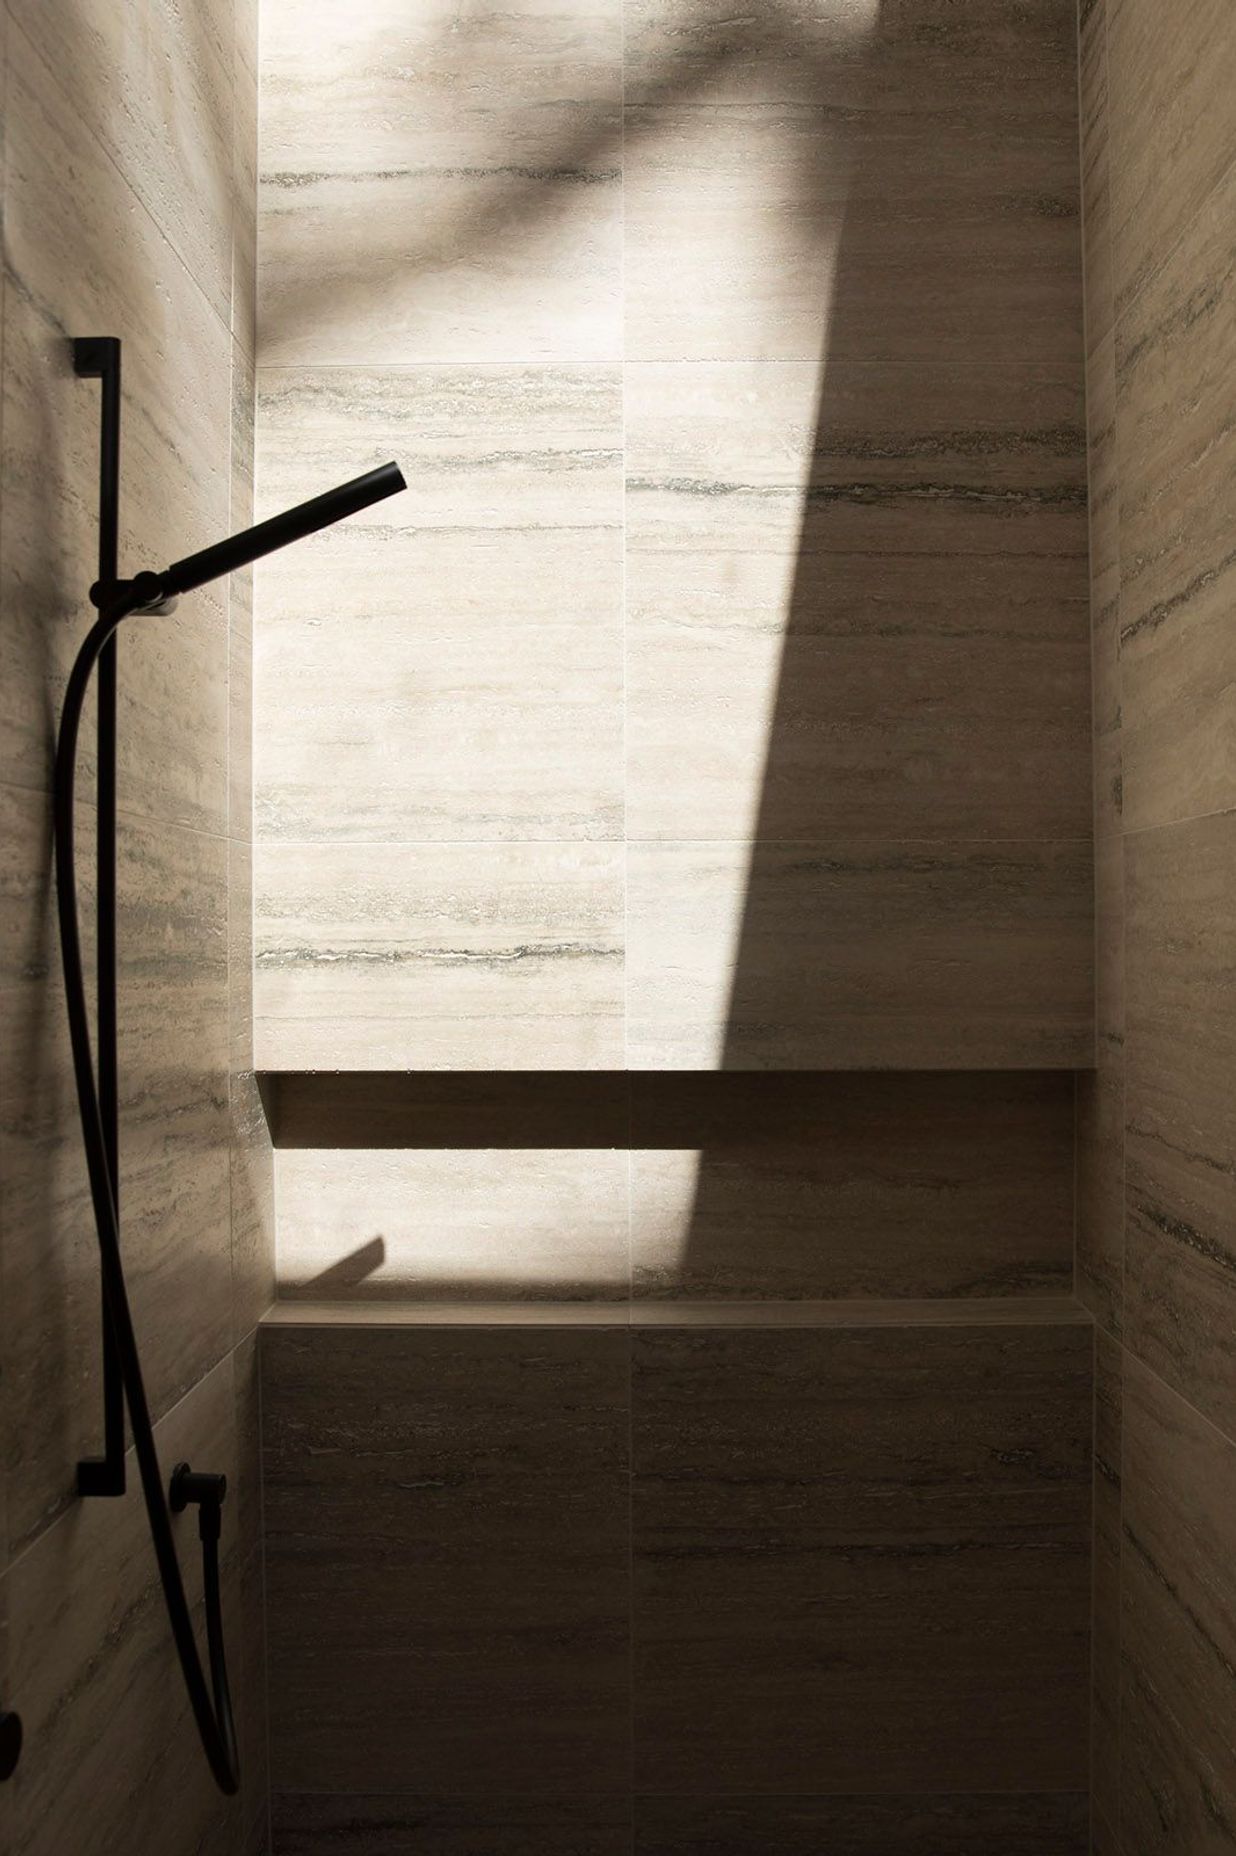 This travertine-lined shower is lit from above via a skylight.